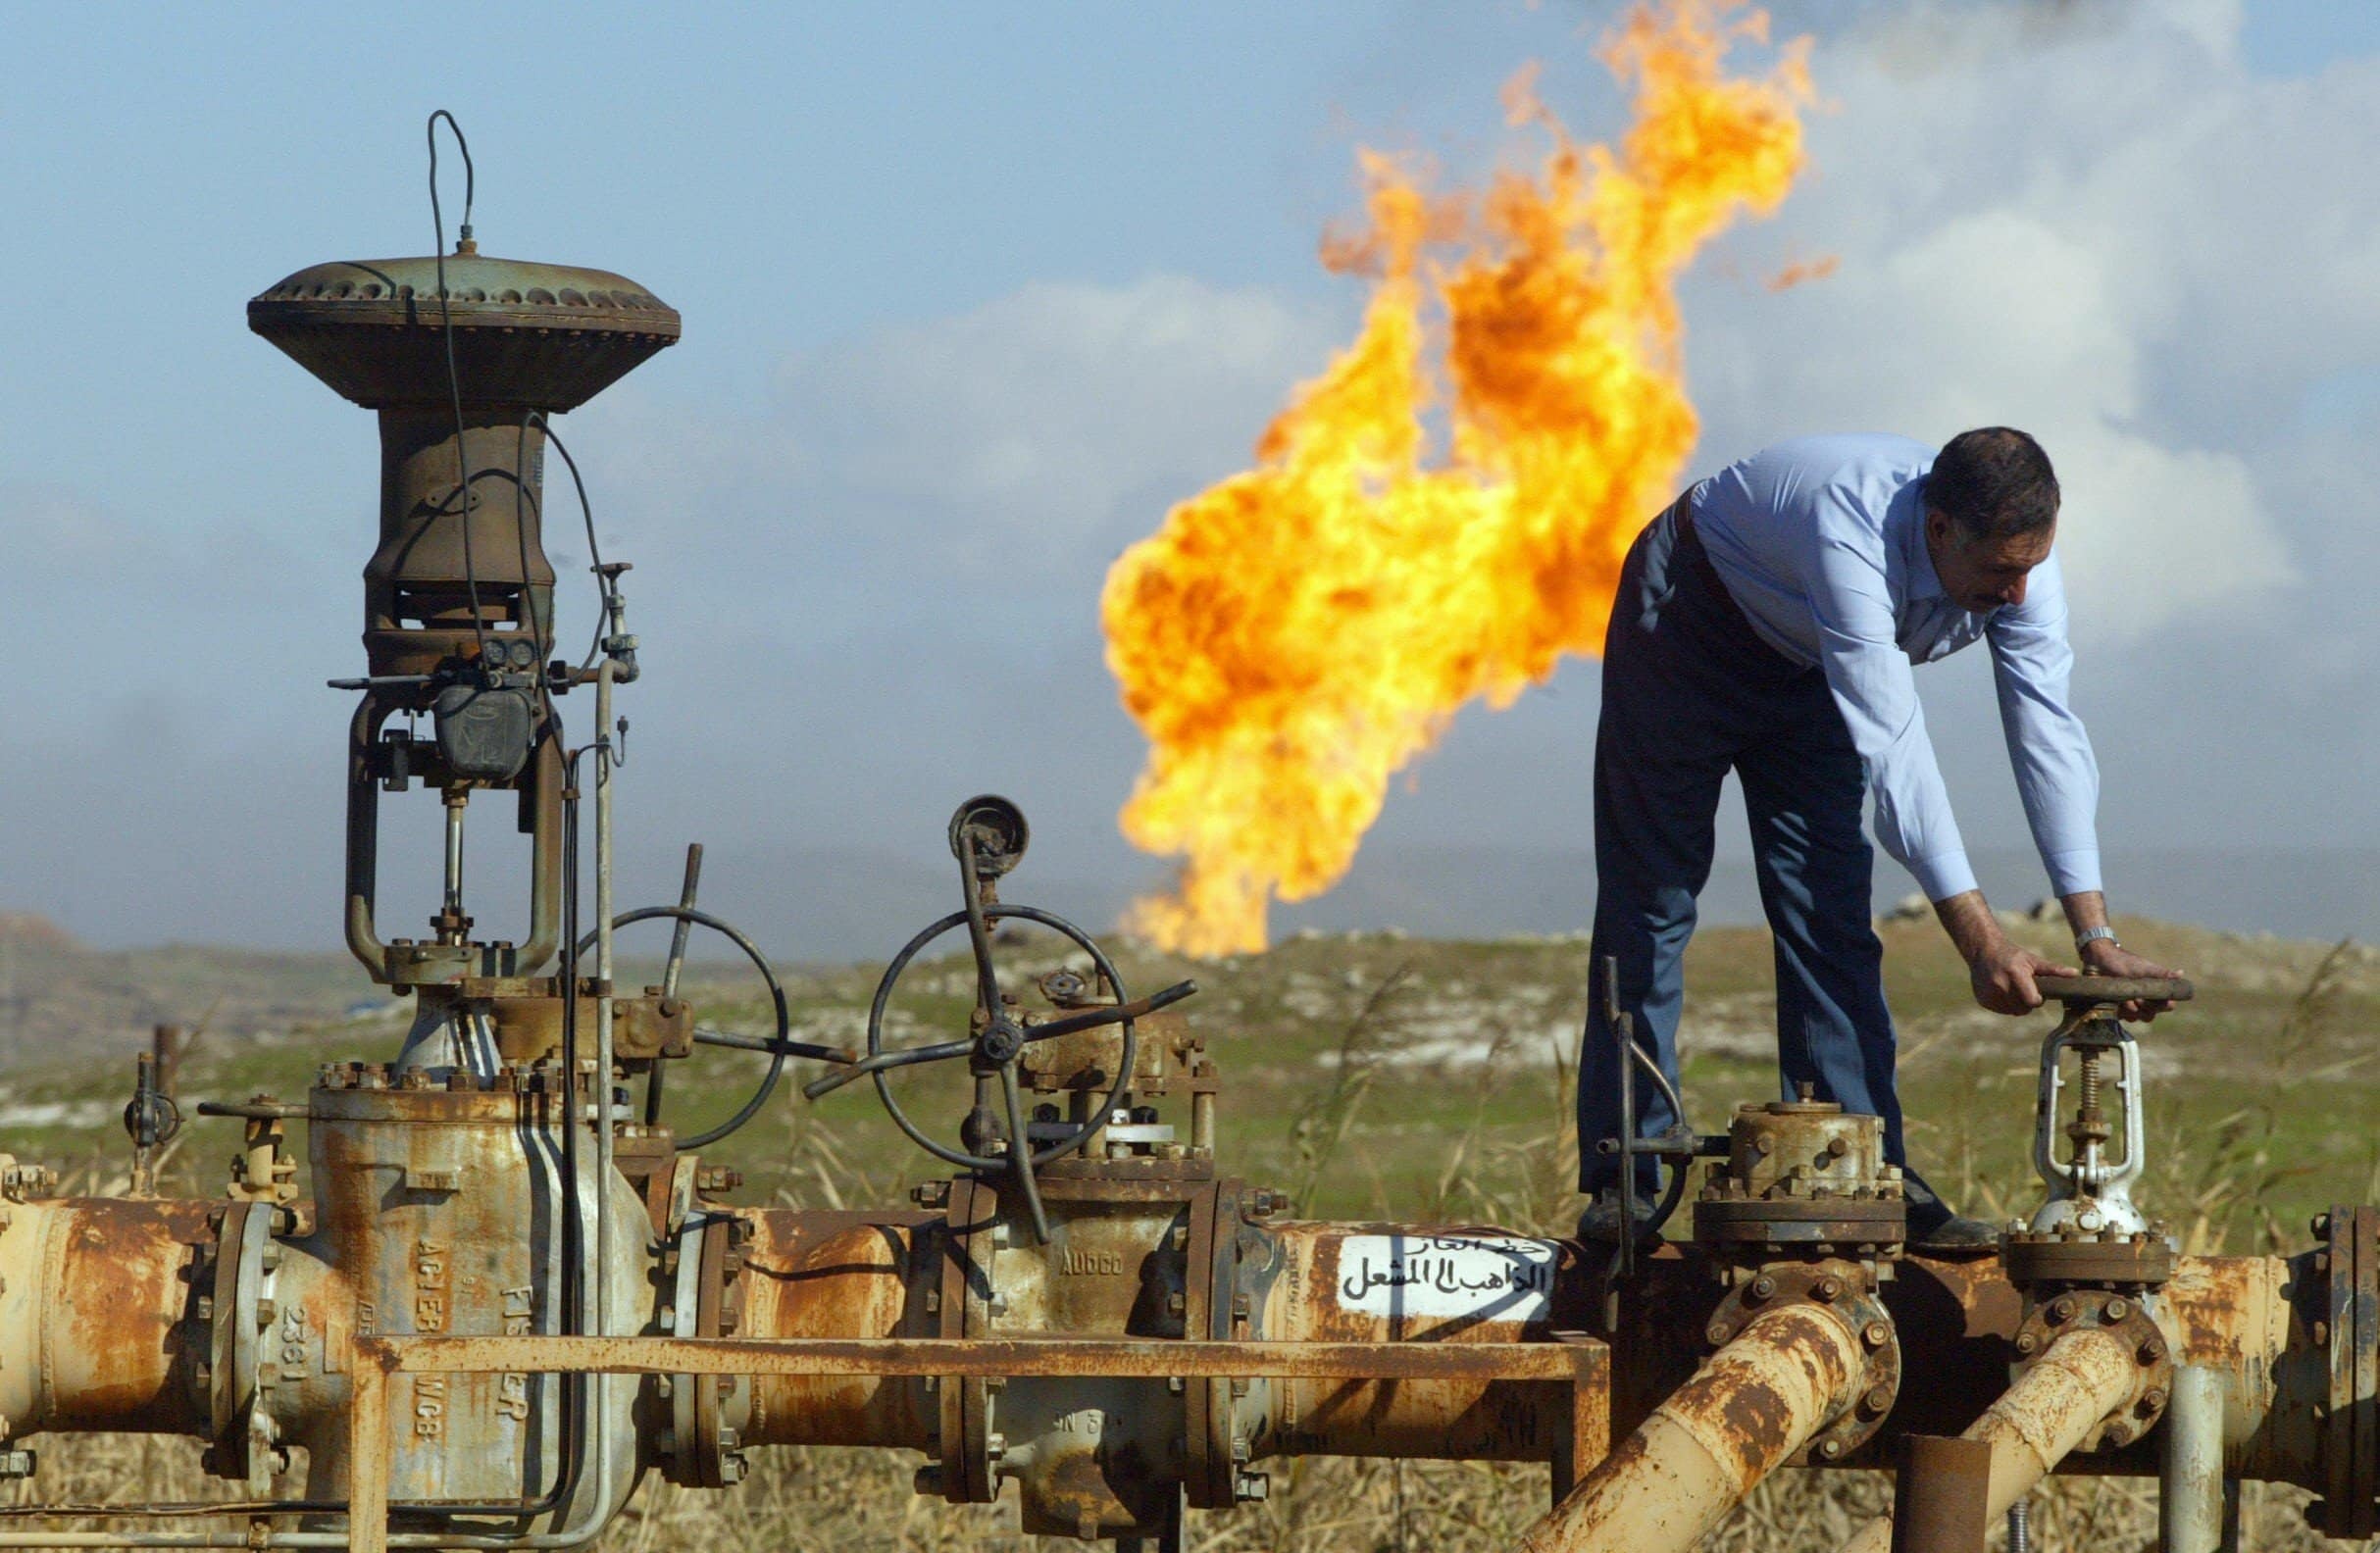 Why are oil and gas companies in Kurdistan Region targeted?